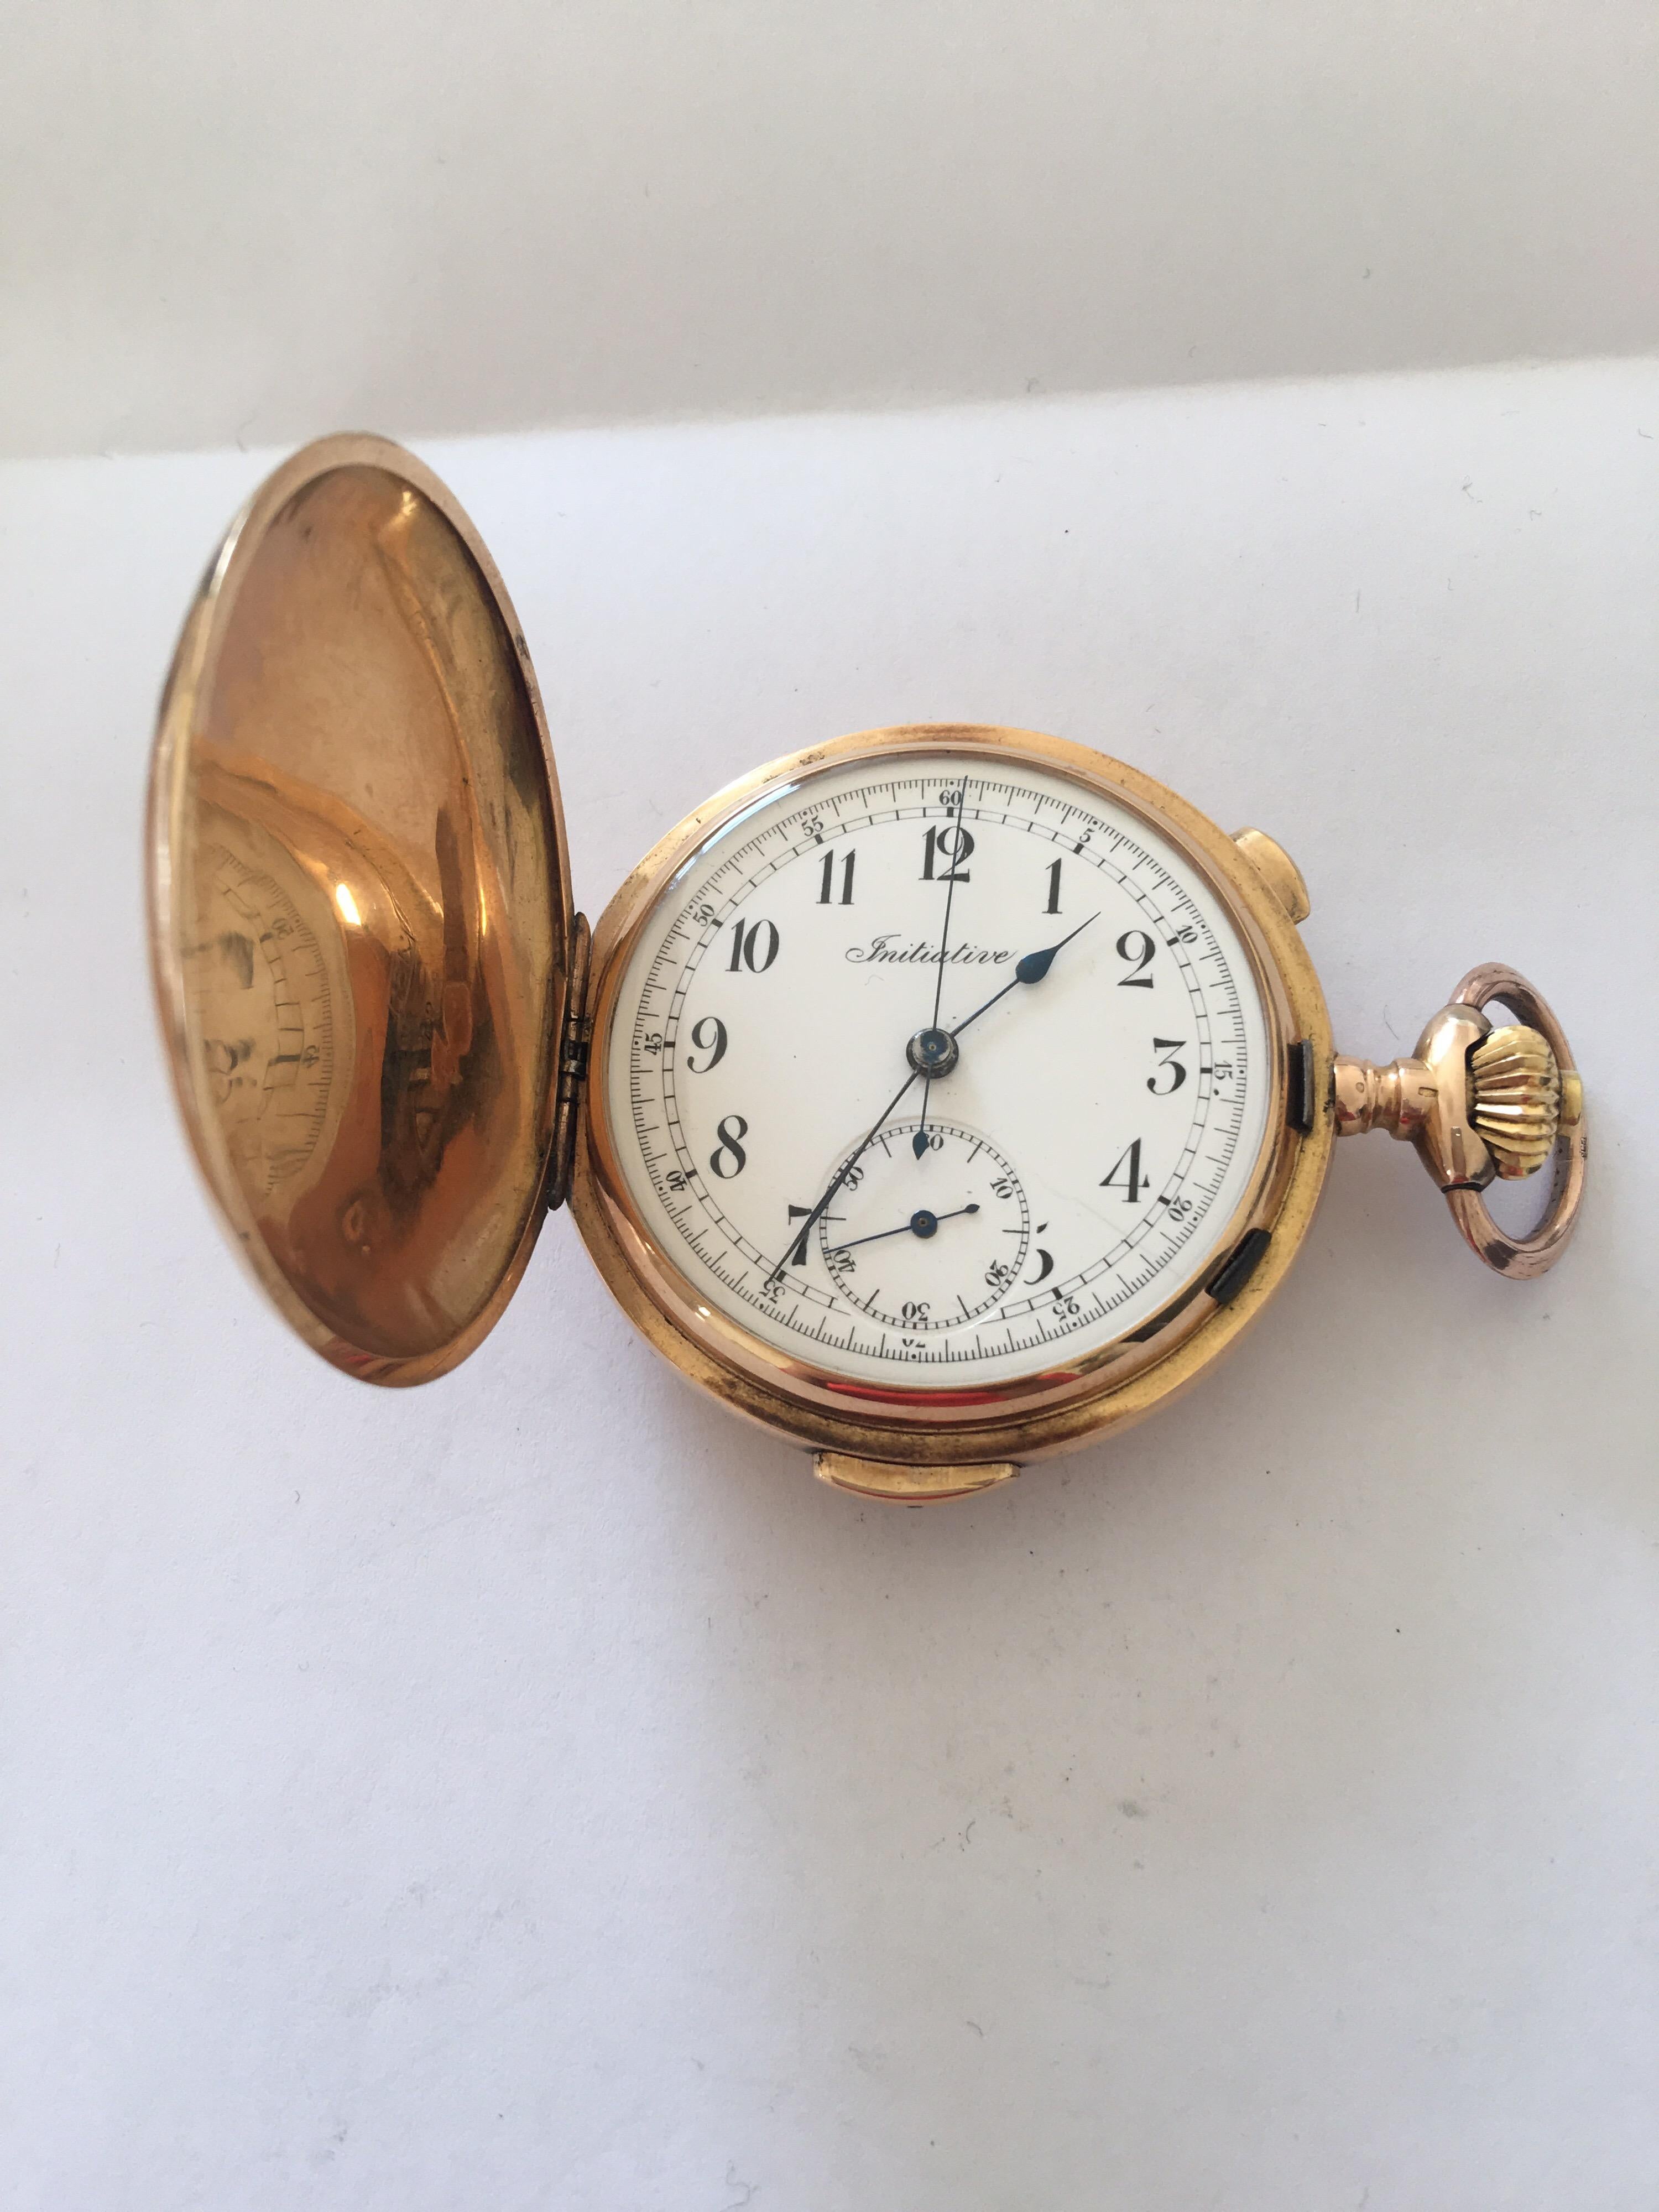 18k Gold Full Hunter Quarter Repeater Chronograph Pocket Watch Signed Initiative 4